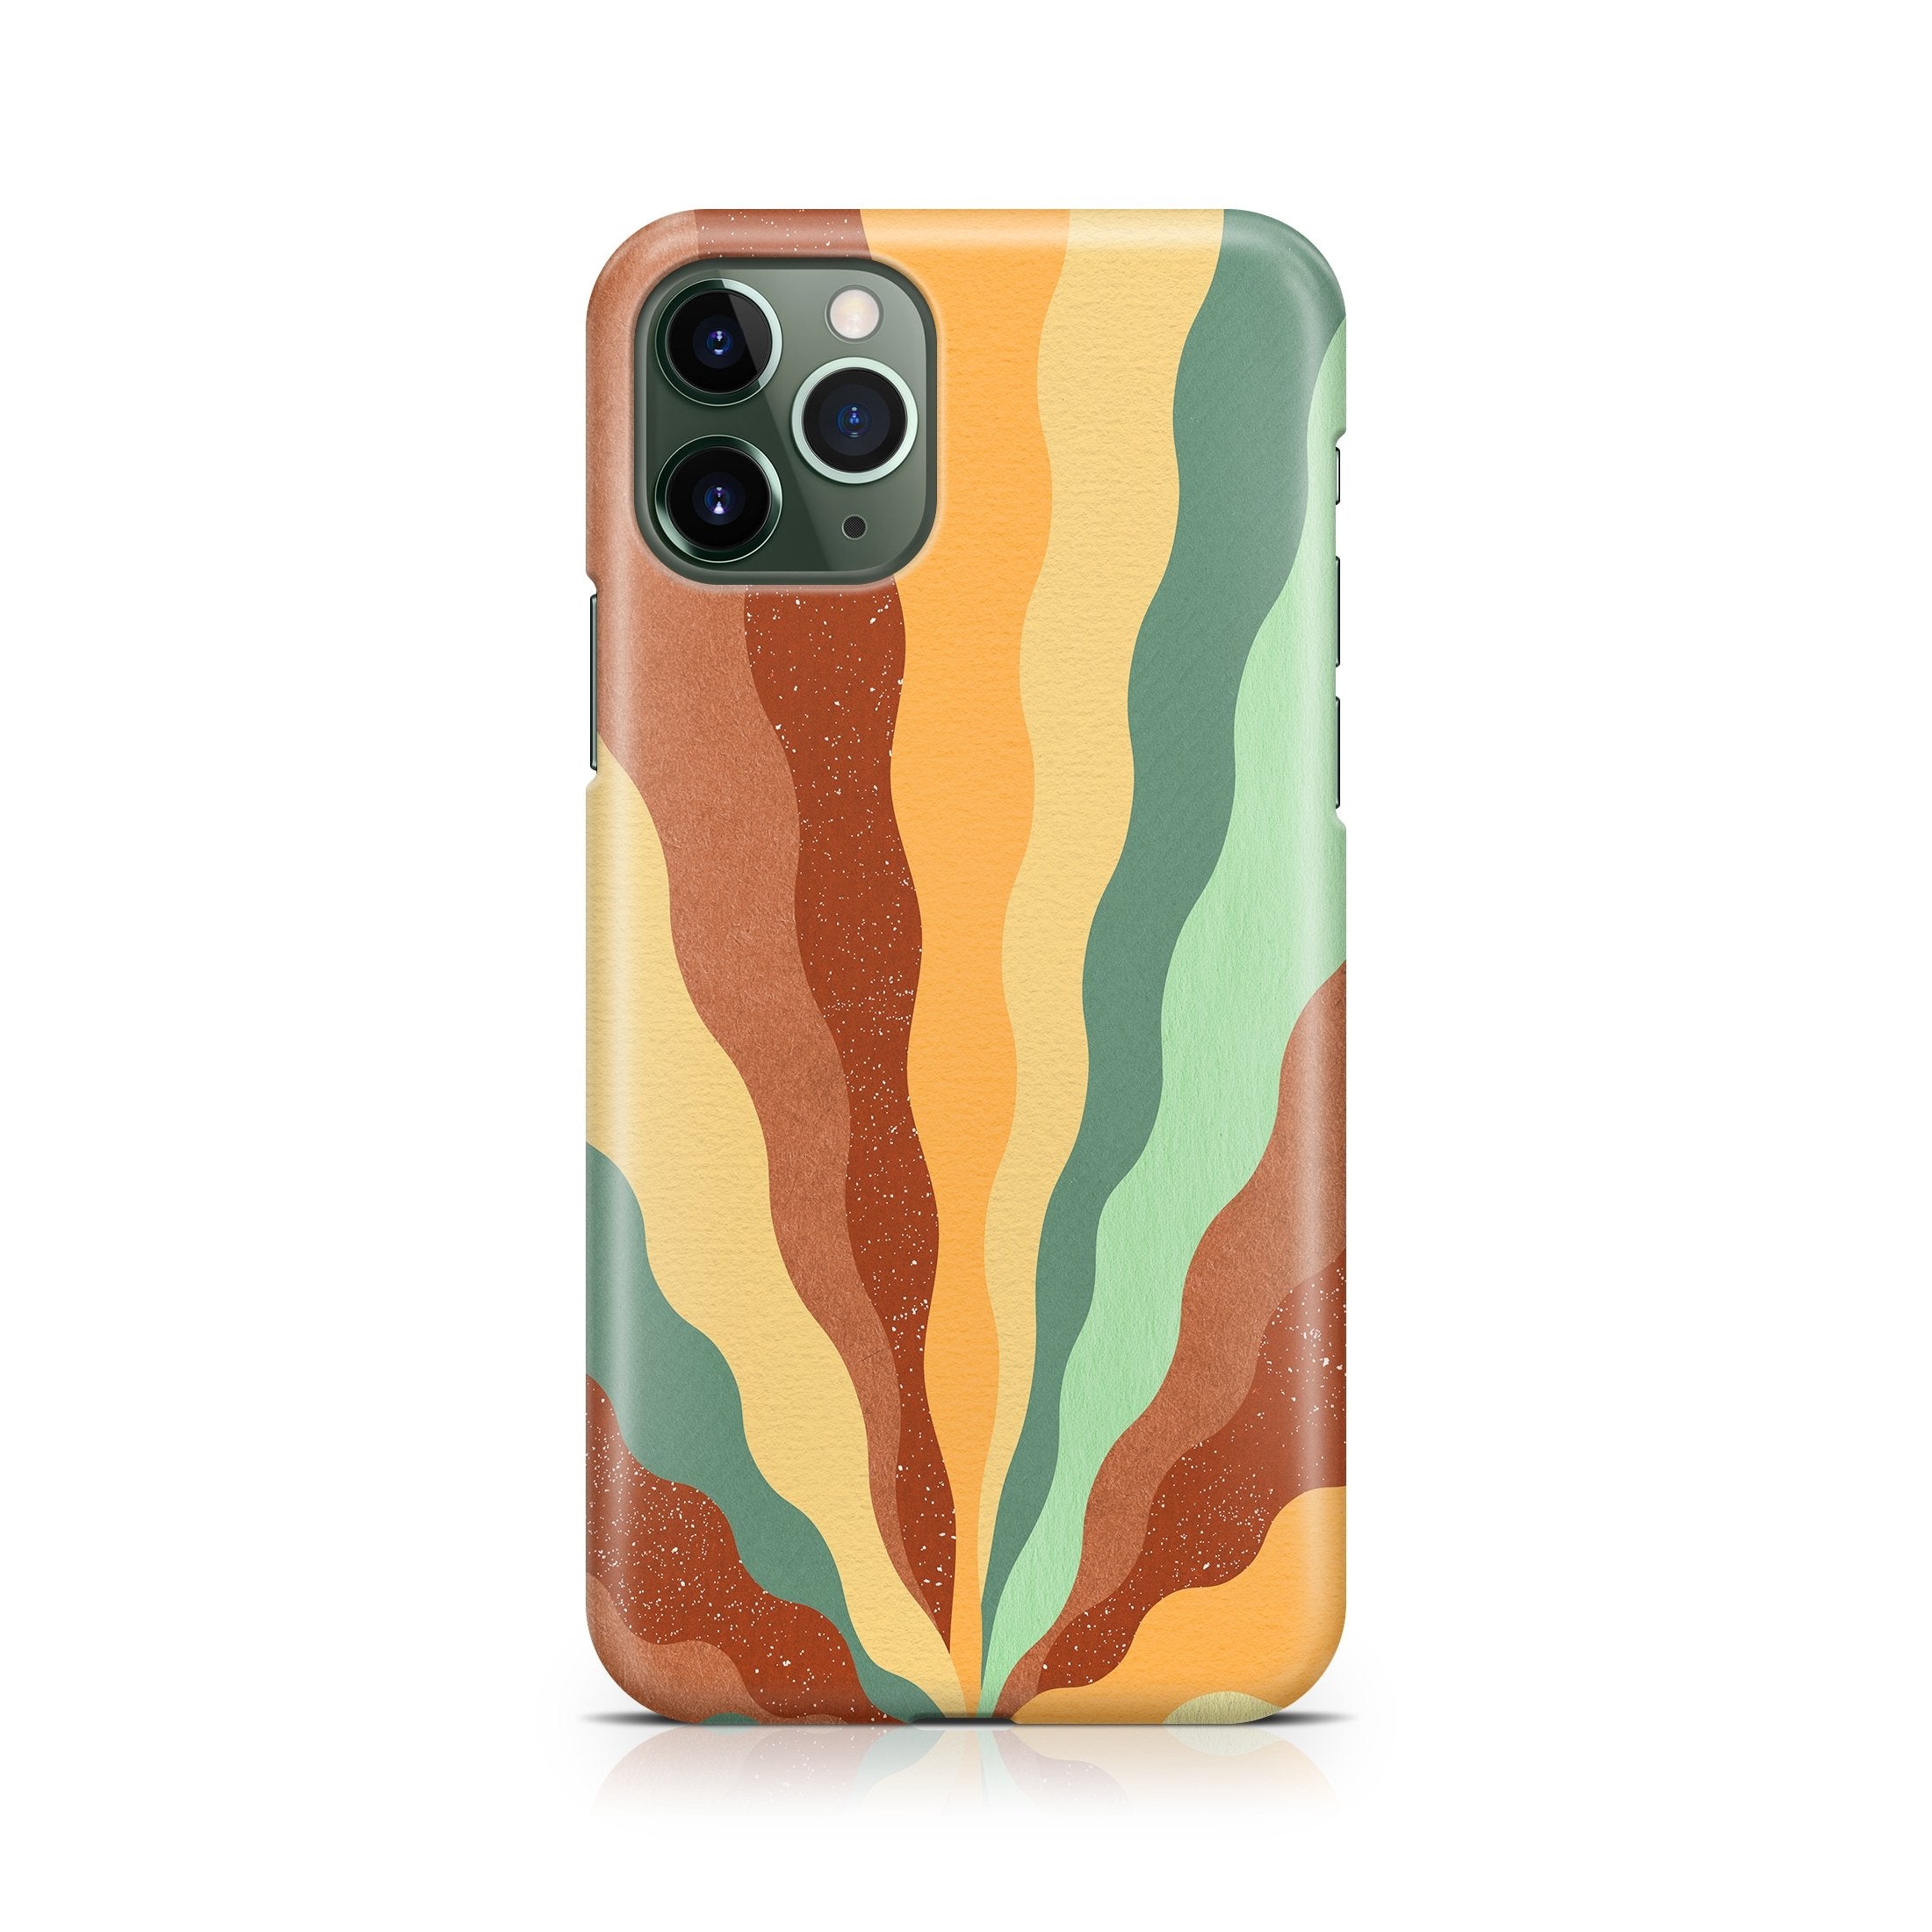 Omni Wave Retro - iPhone phone case designs by CaseSwagger